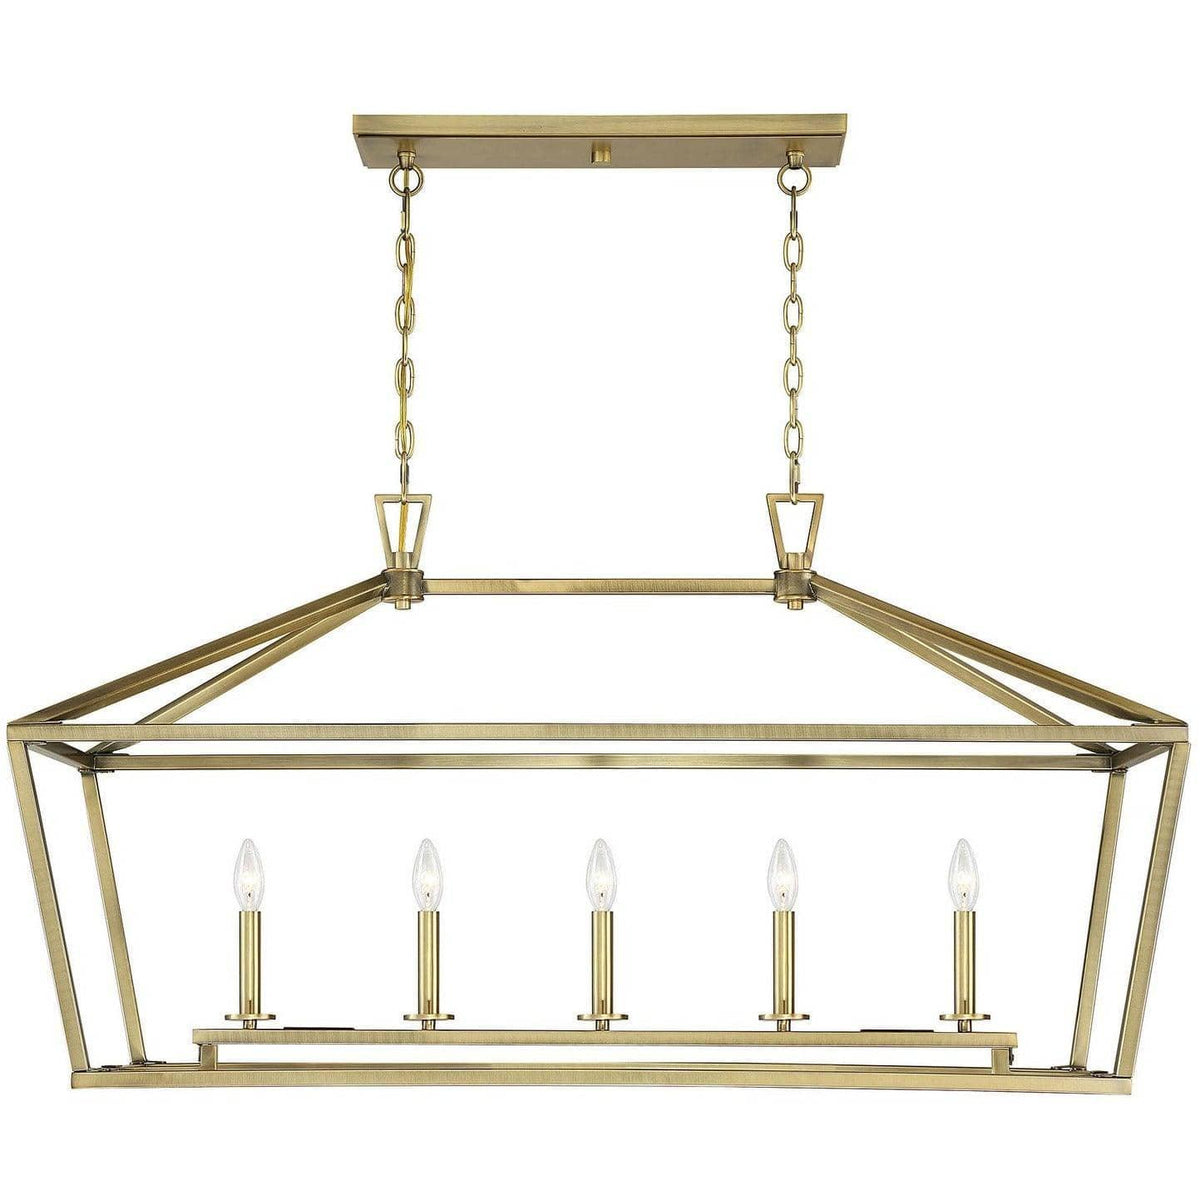 Savoy House - Townsend Five Light Linear Chandelier - 1-324-5-322 | Montreal Lighting & Hardware